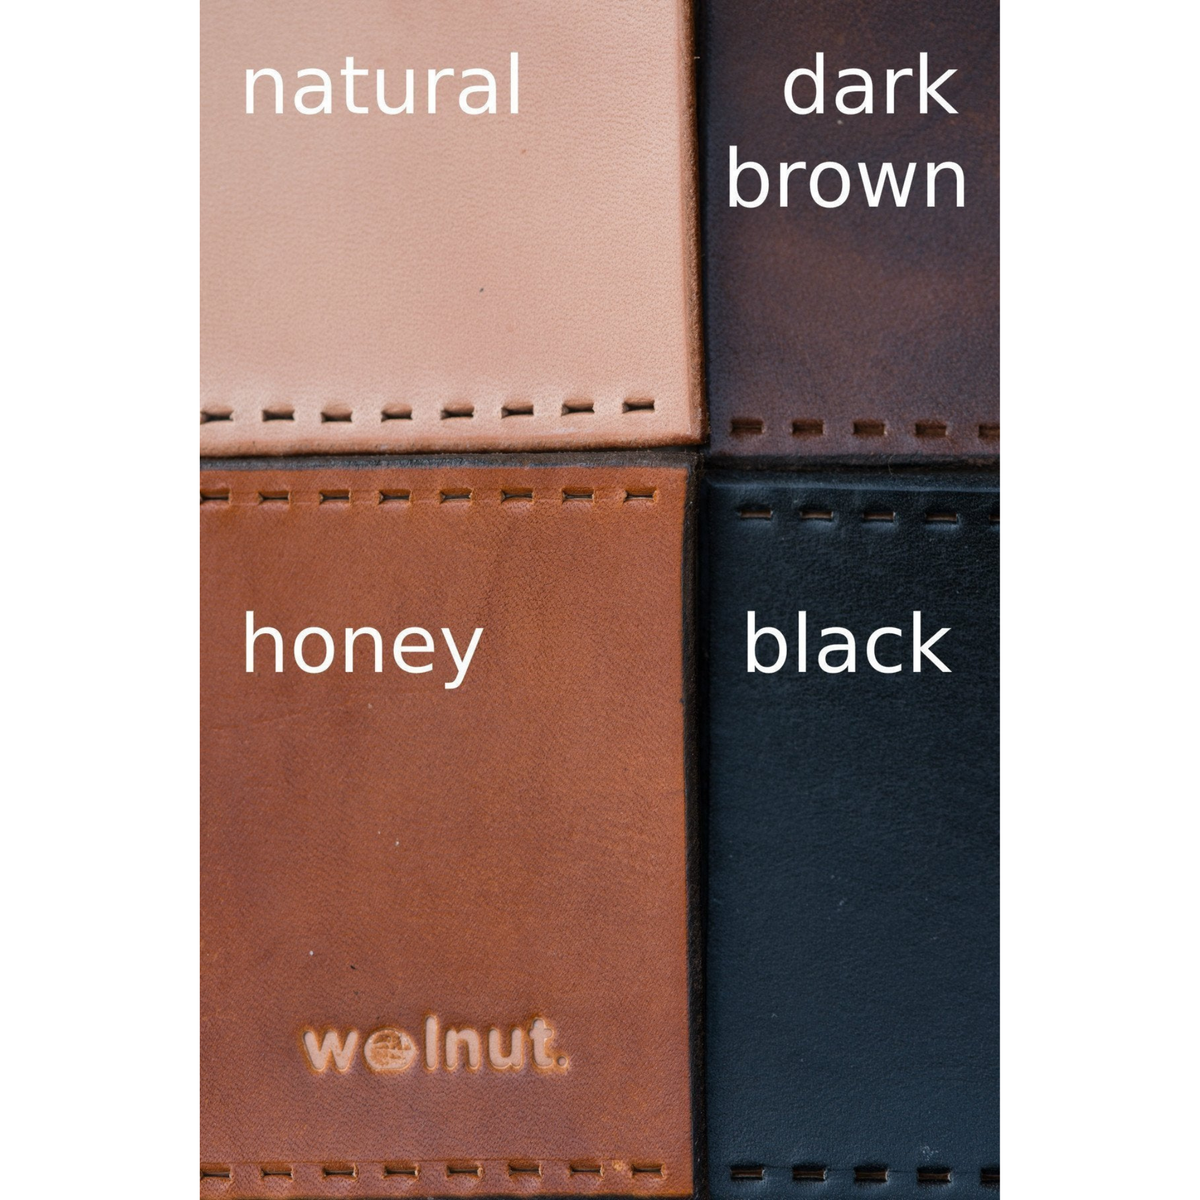 Leather color swatch taken in natural outdoor light showing the four leather colors: Natural, Honey, Dark Brown, and Black